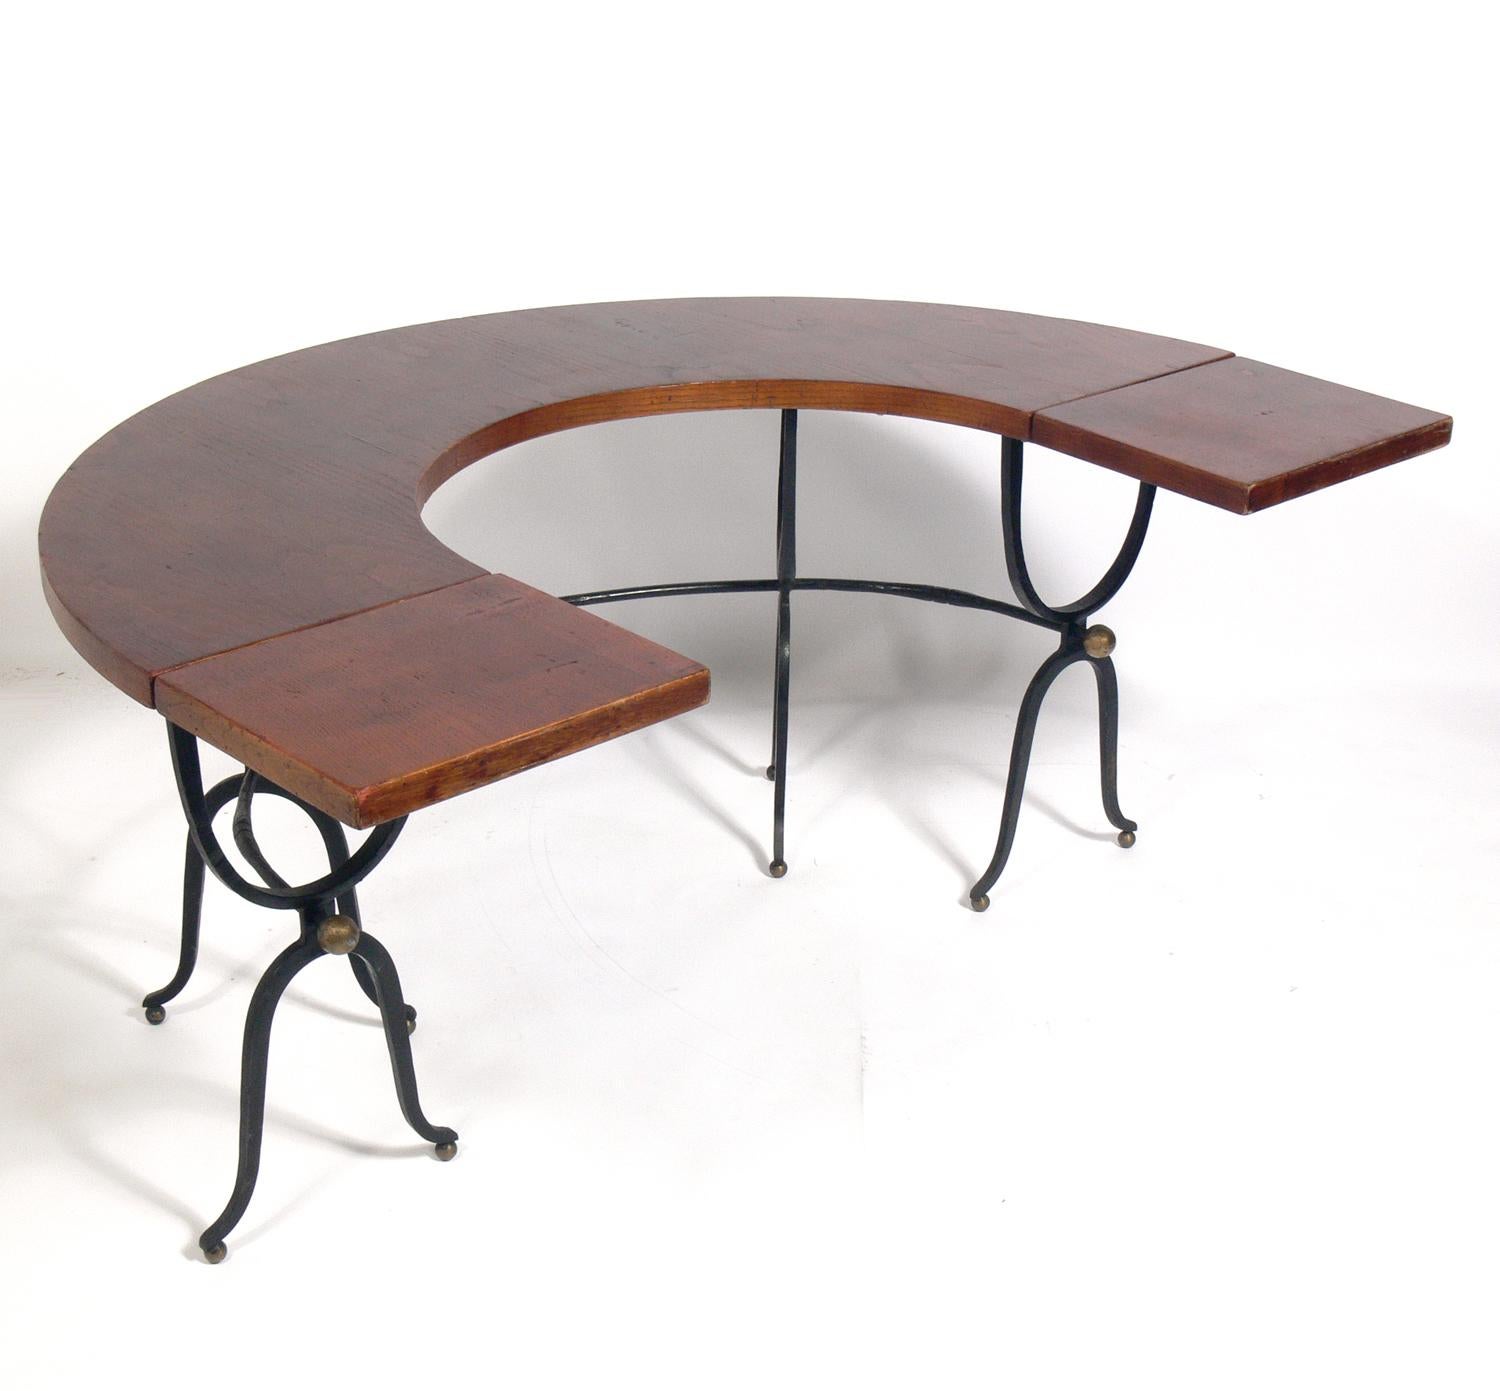 Italian horseshoe shaped desk, Italy, circa 1960s. Elegant form with great function as well, with two drop leaves to provide more desk space when needed. It is a versatile size and can be used as a desk, bar, or serving table. It is currently being